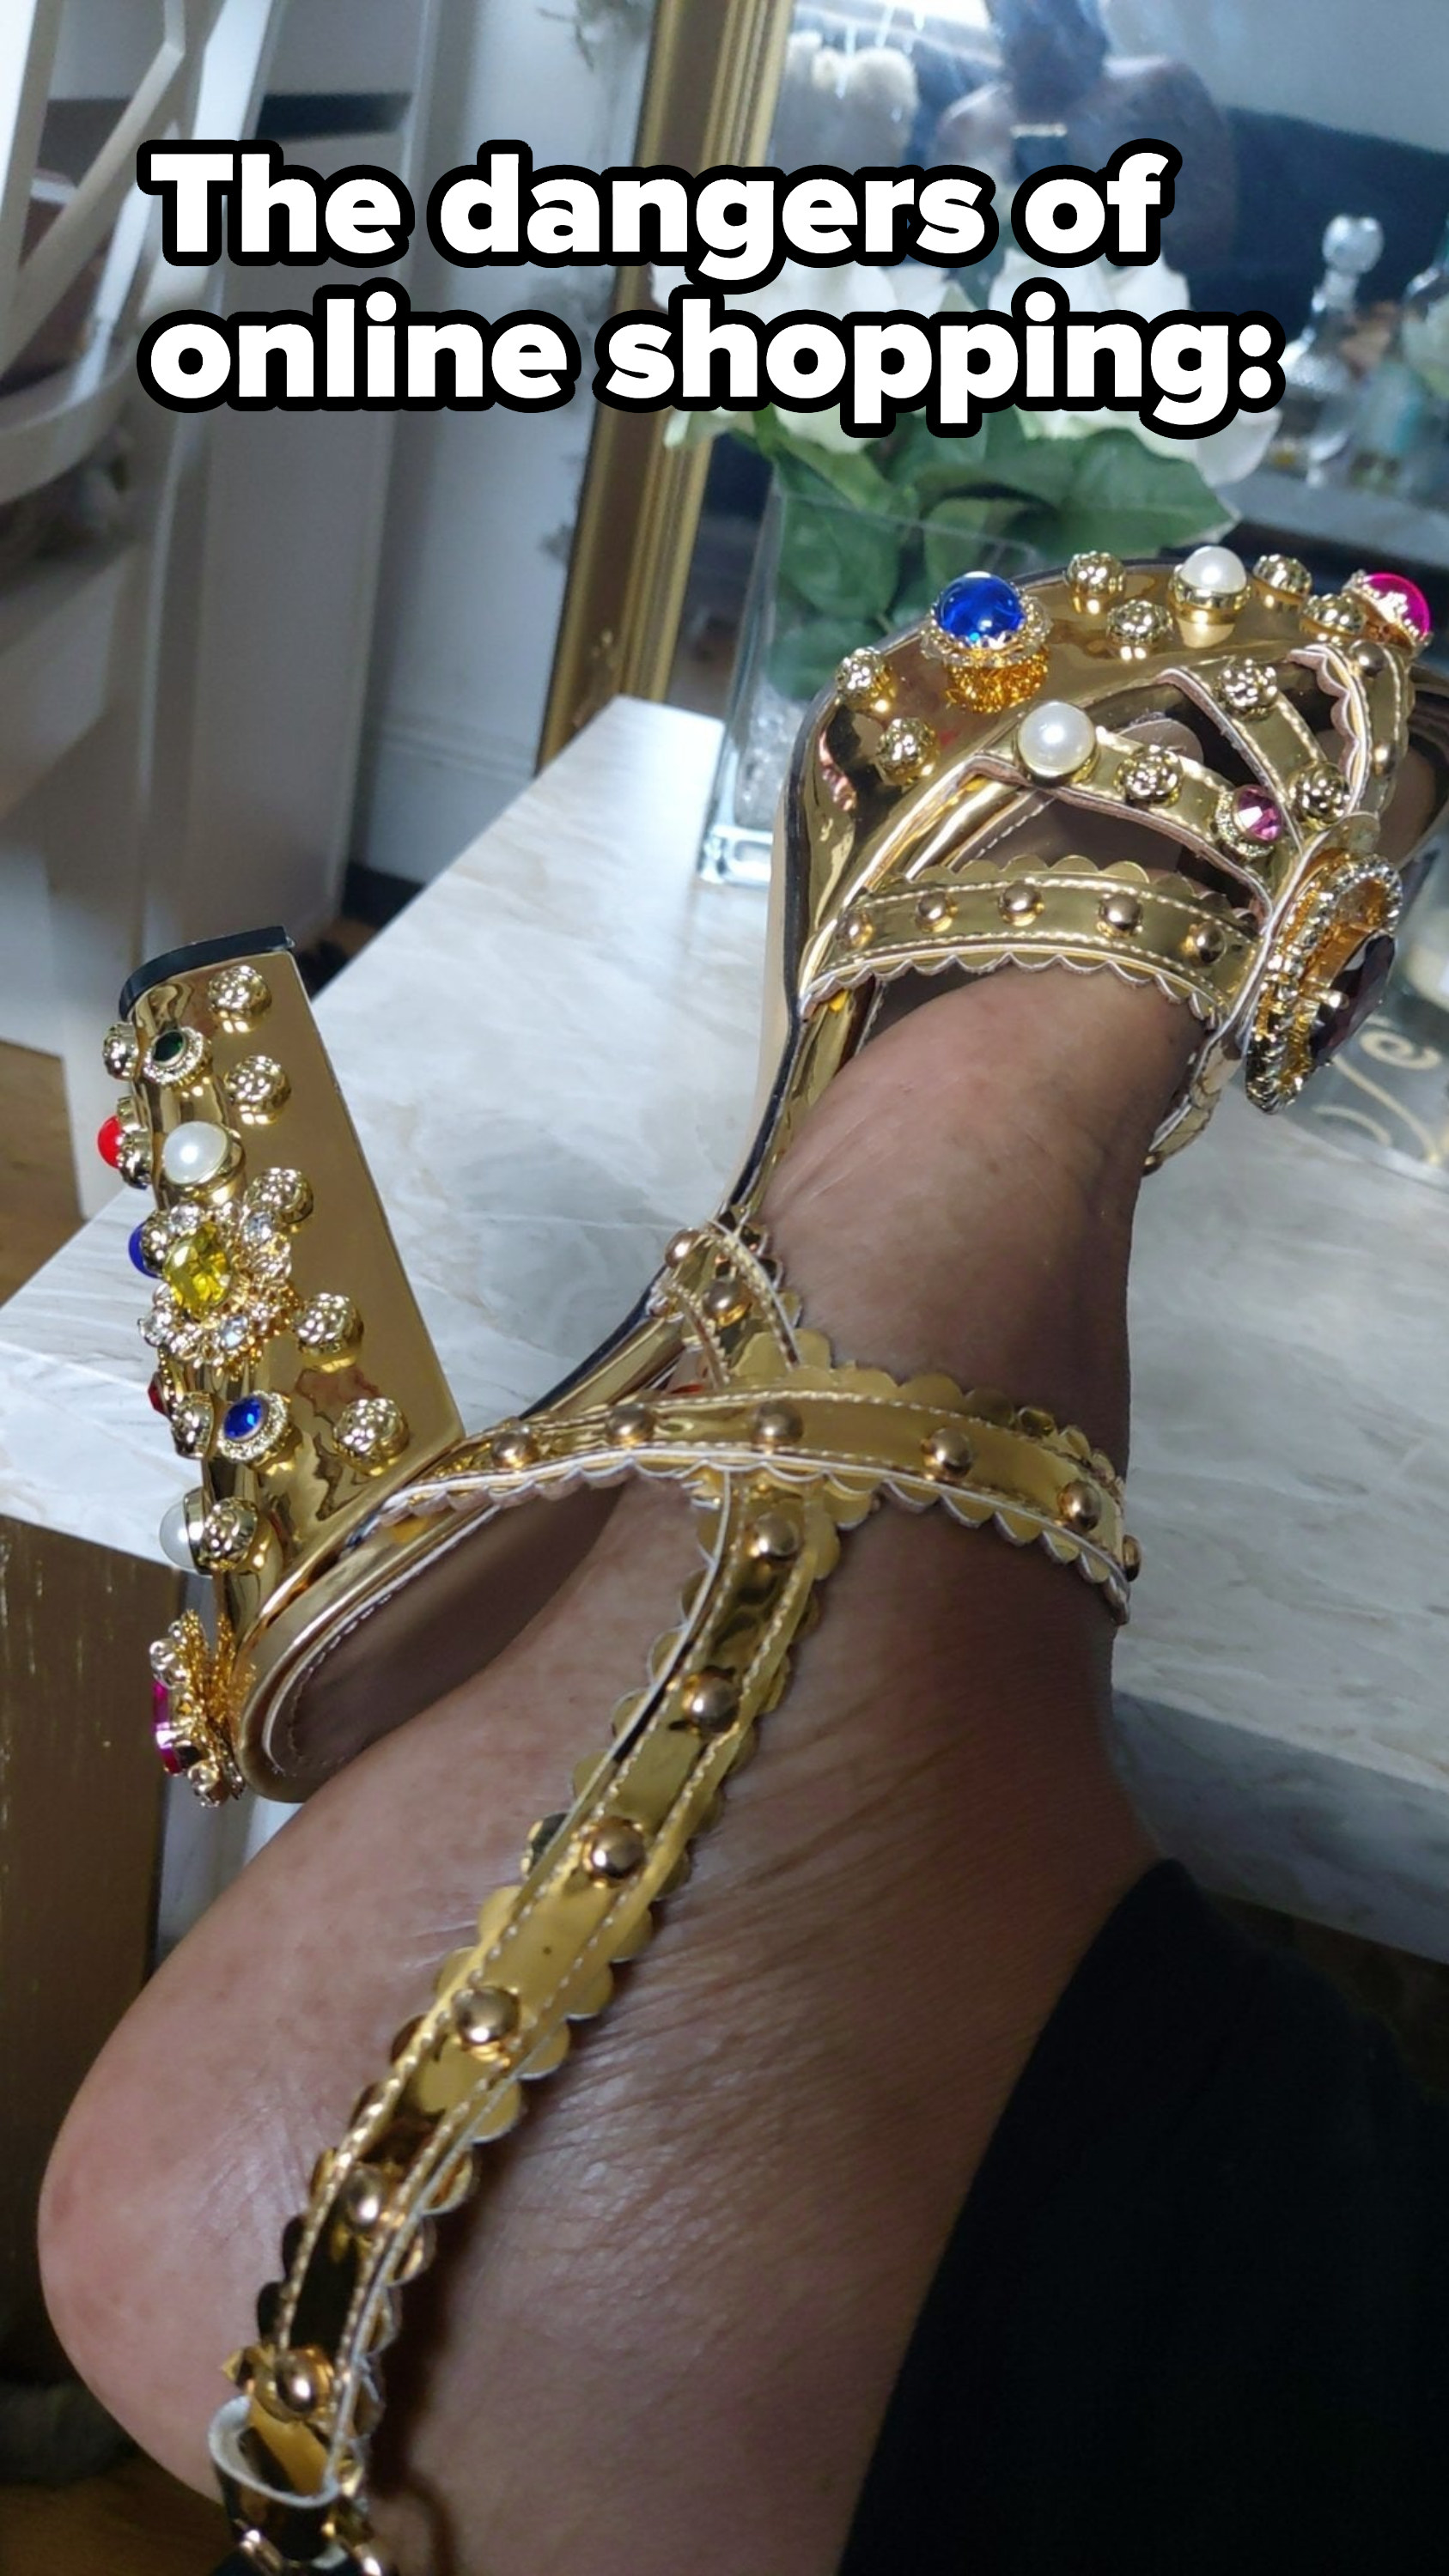 A bedazzled high heel